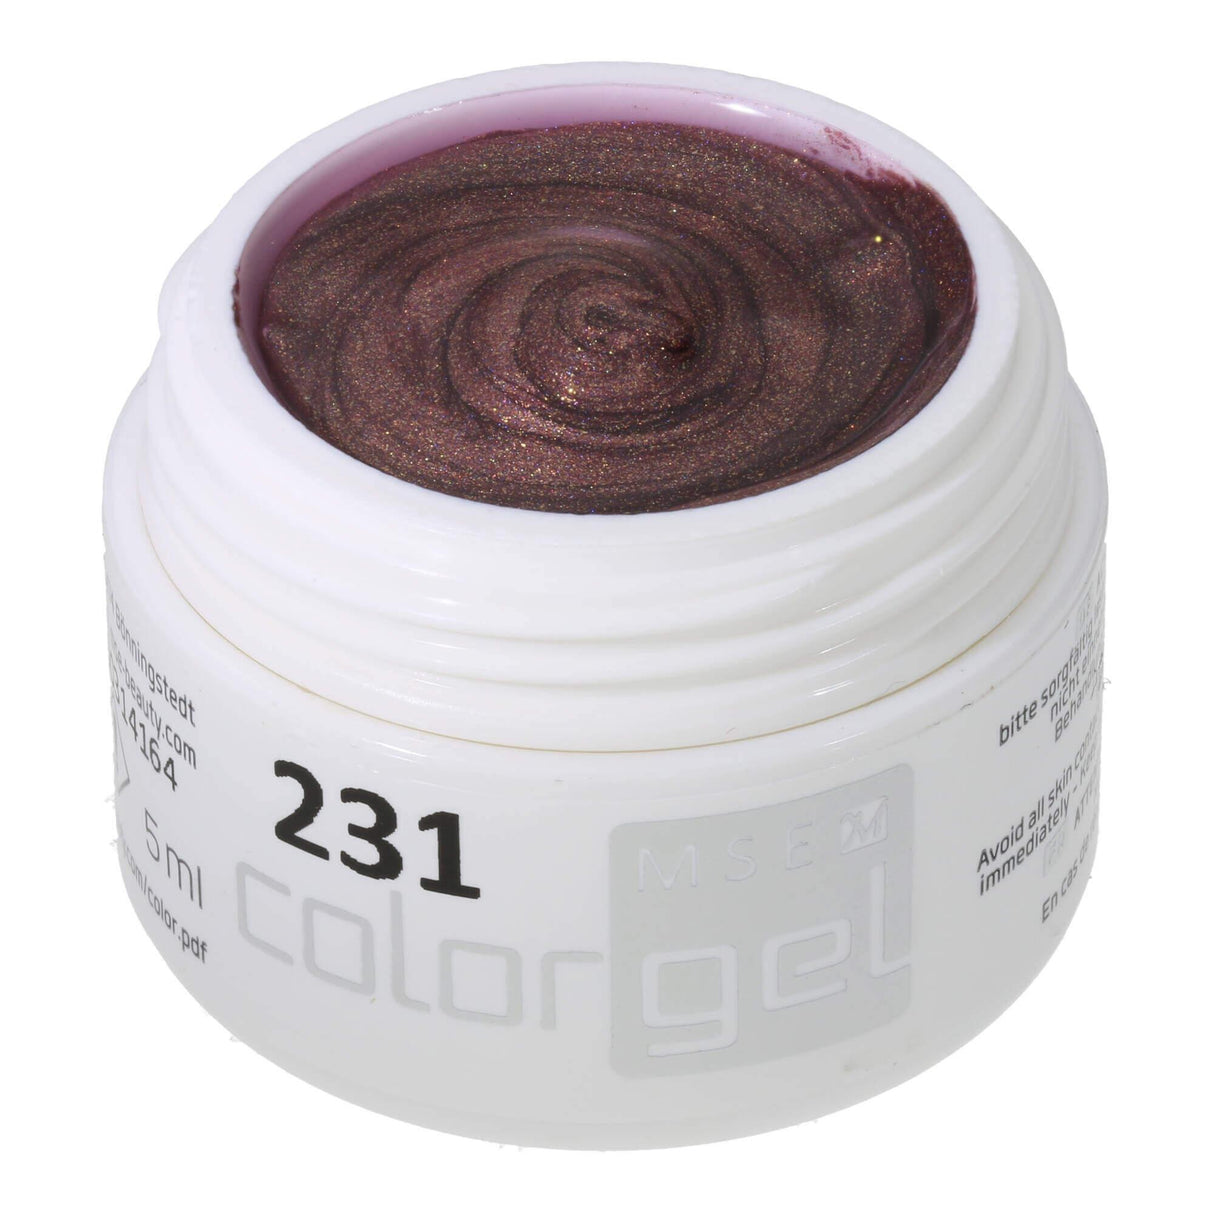 #231 Premium-EFFEKT Color Gel 5ml Dunkles Gold-Pink - MSE - The Beauty Company